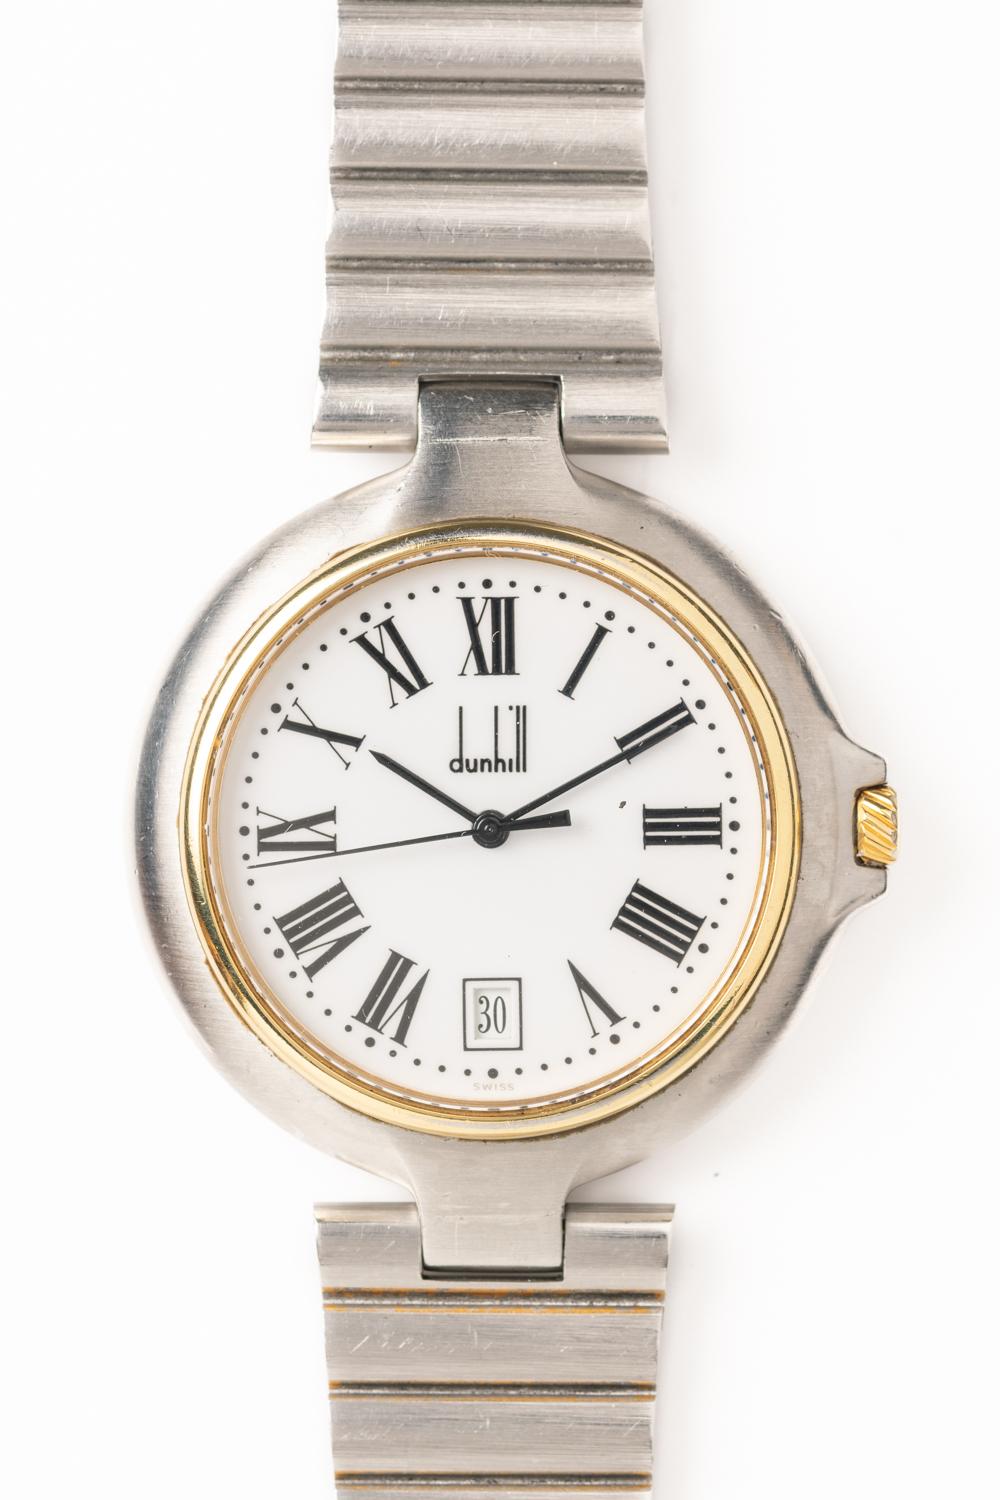 Classic and iconic Vintage Dunhill Millenium Quartz Wristwatch made circa 1980's. This minimalistic and elegant watch combines Dunhill's timeless design and everyday functionality. The watch is in nice, vintage working condition, with new batteries